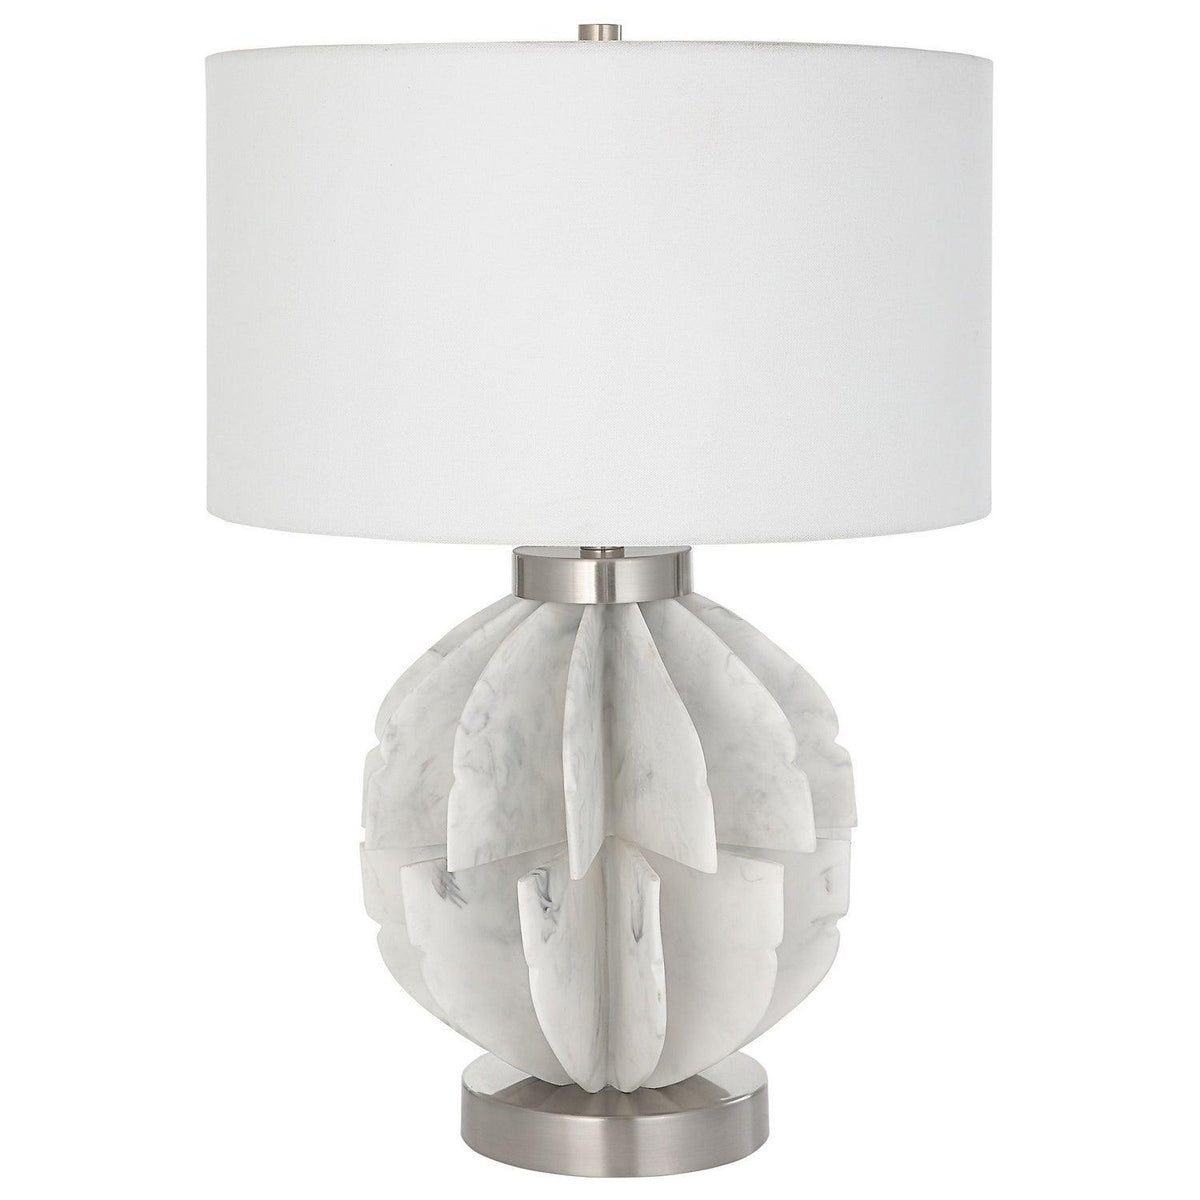 The Uttermost - Repetition Table Lamp - 30015-1 | Montreal Lighting & Hardware